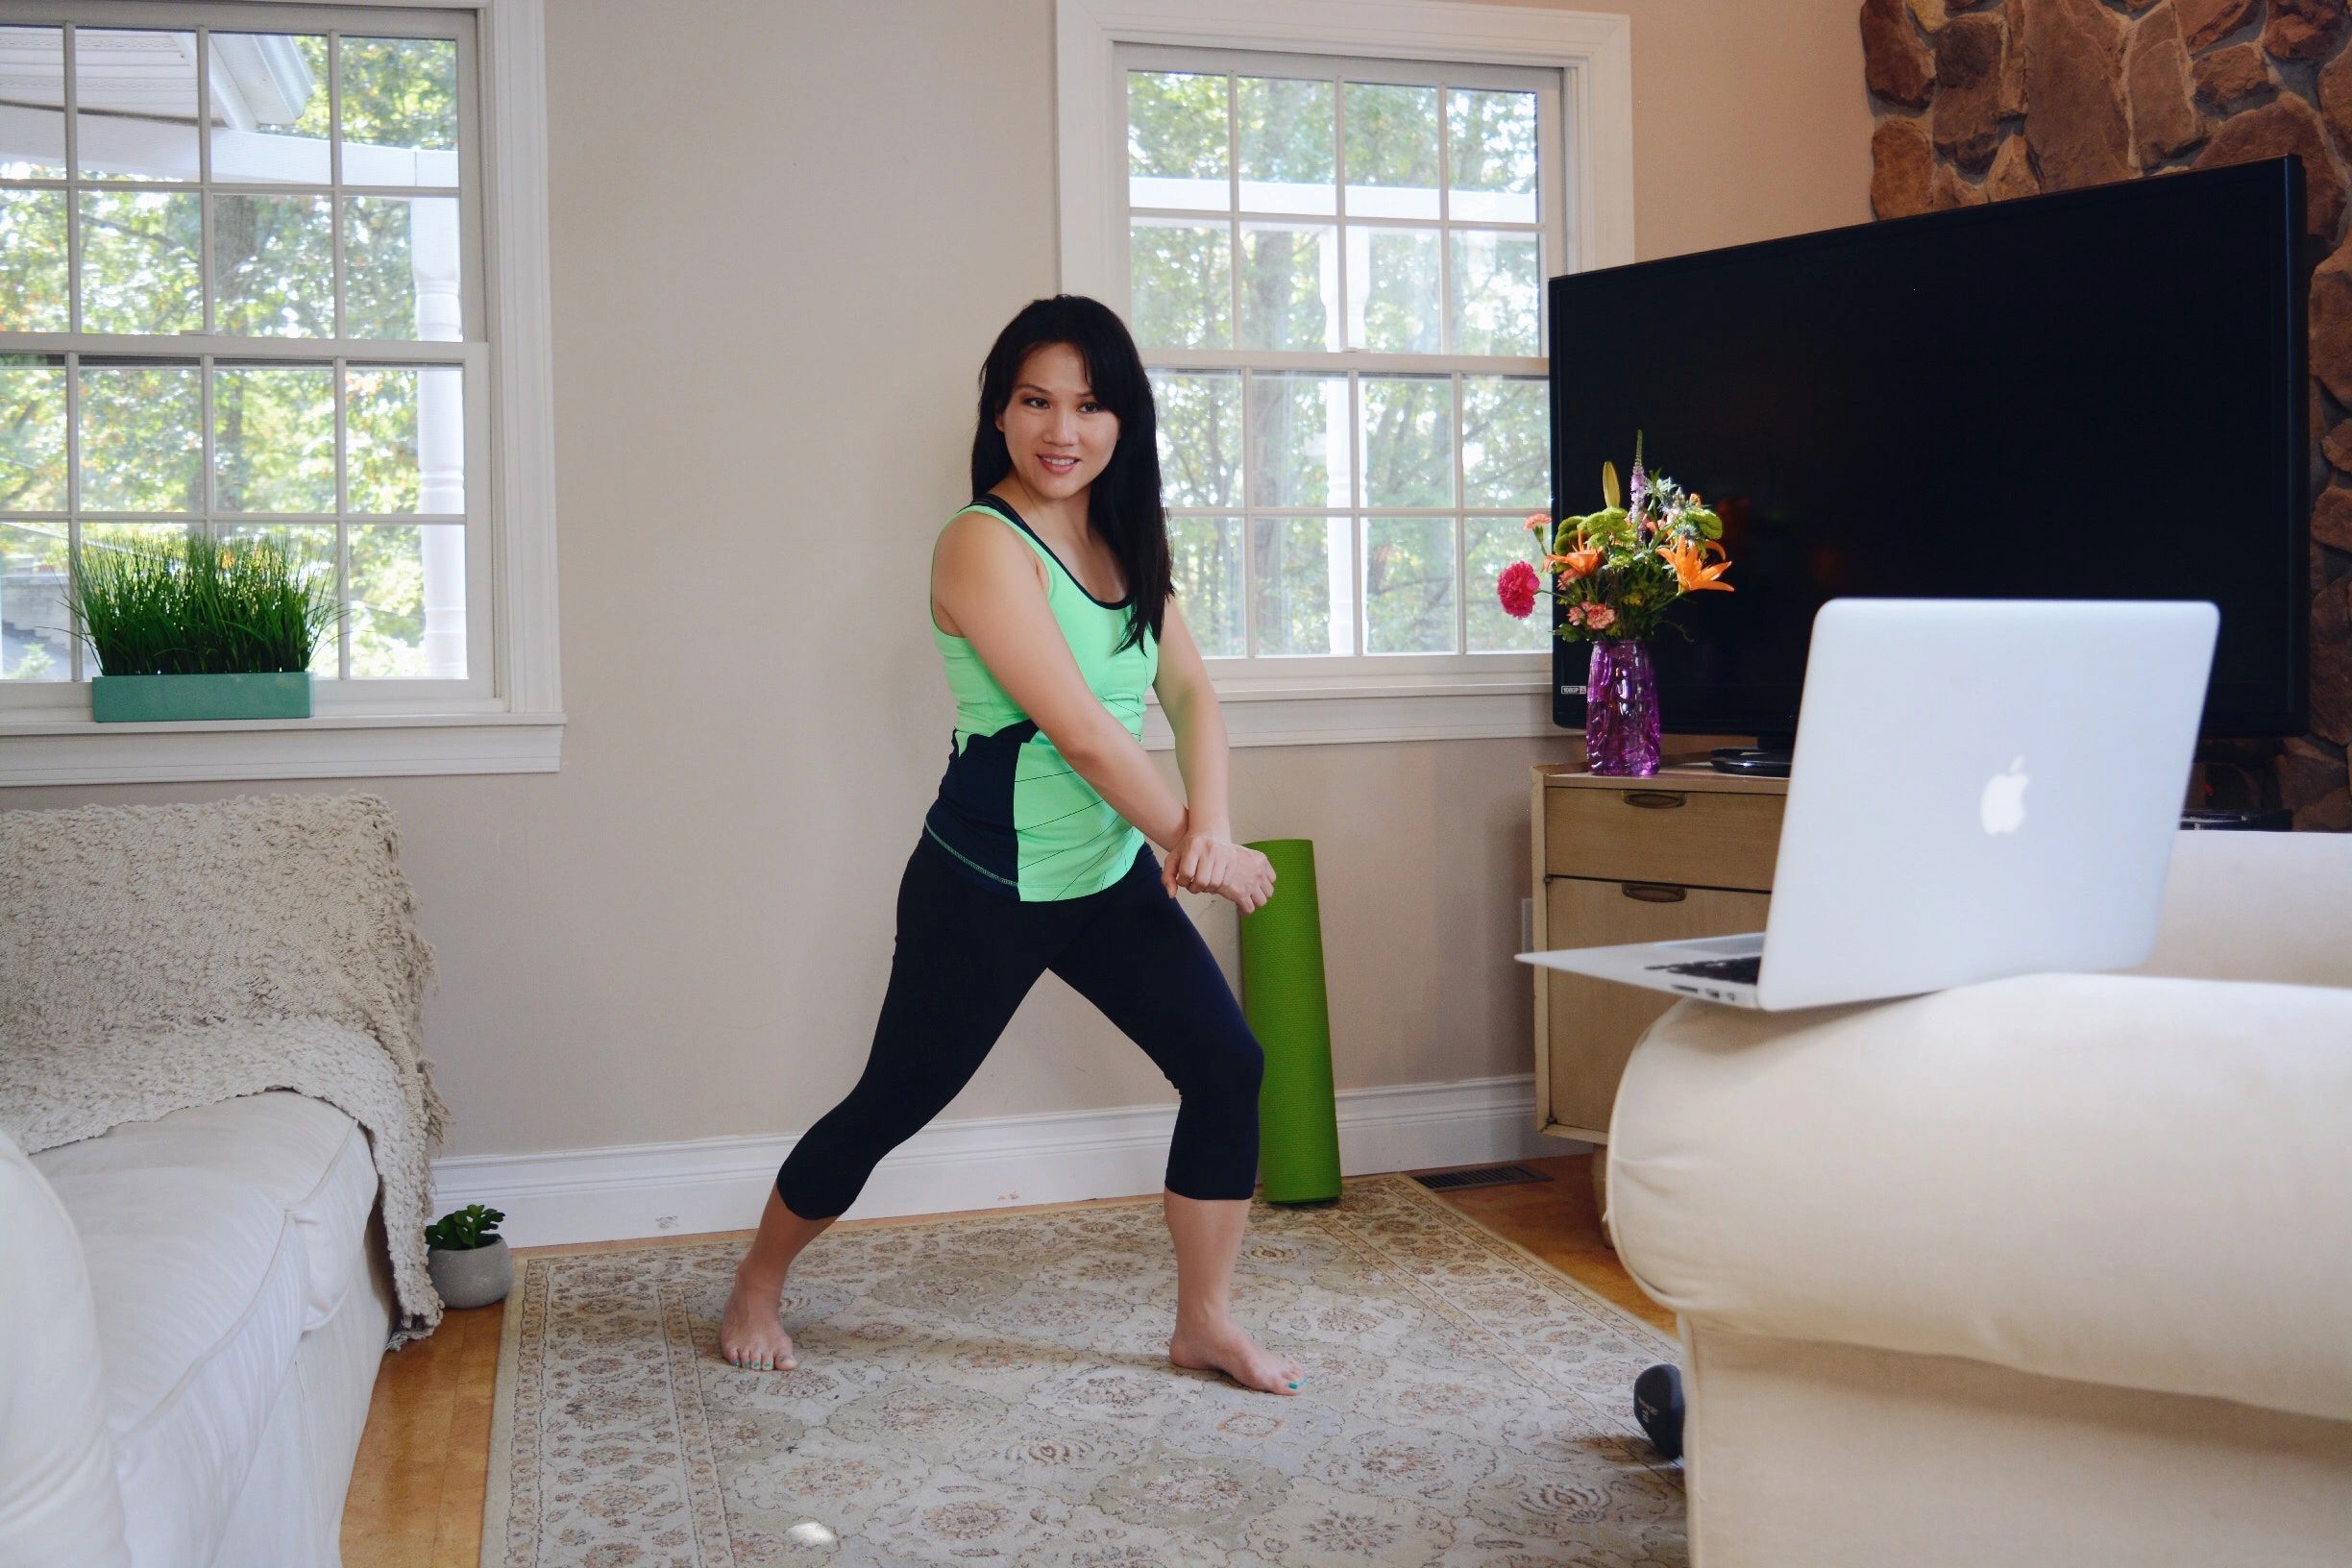 Connect with a live personal trainer and do a professional workout in the comfort of your own home.